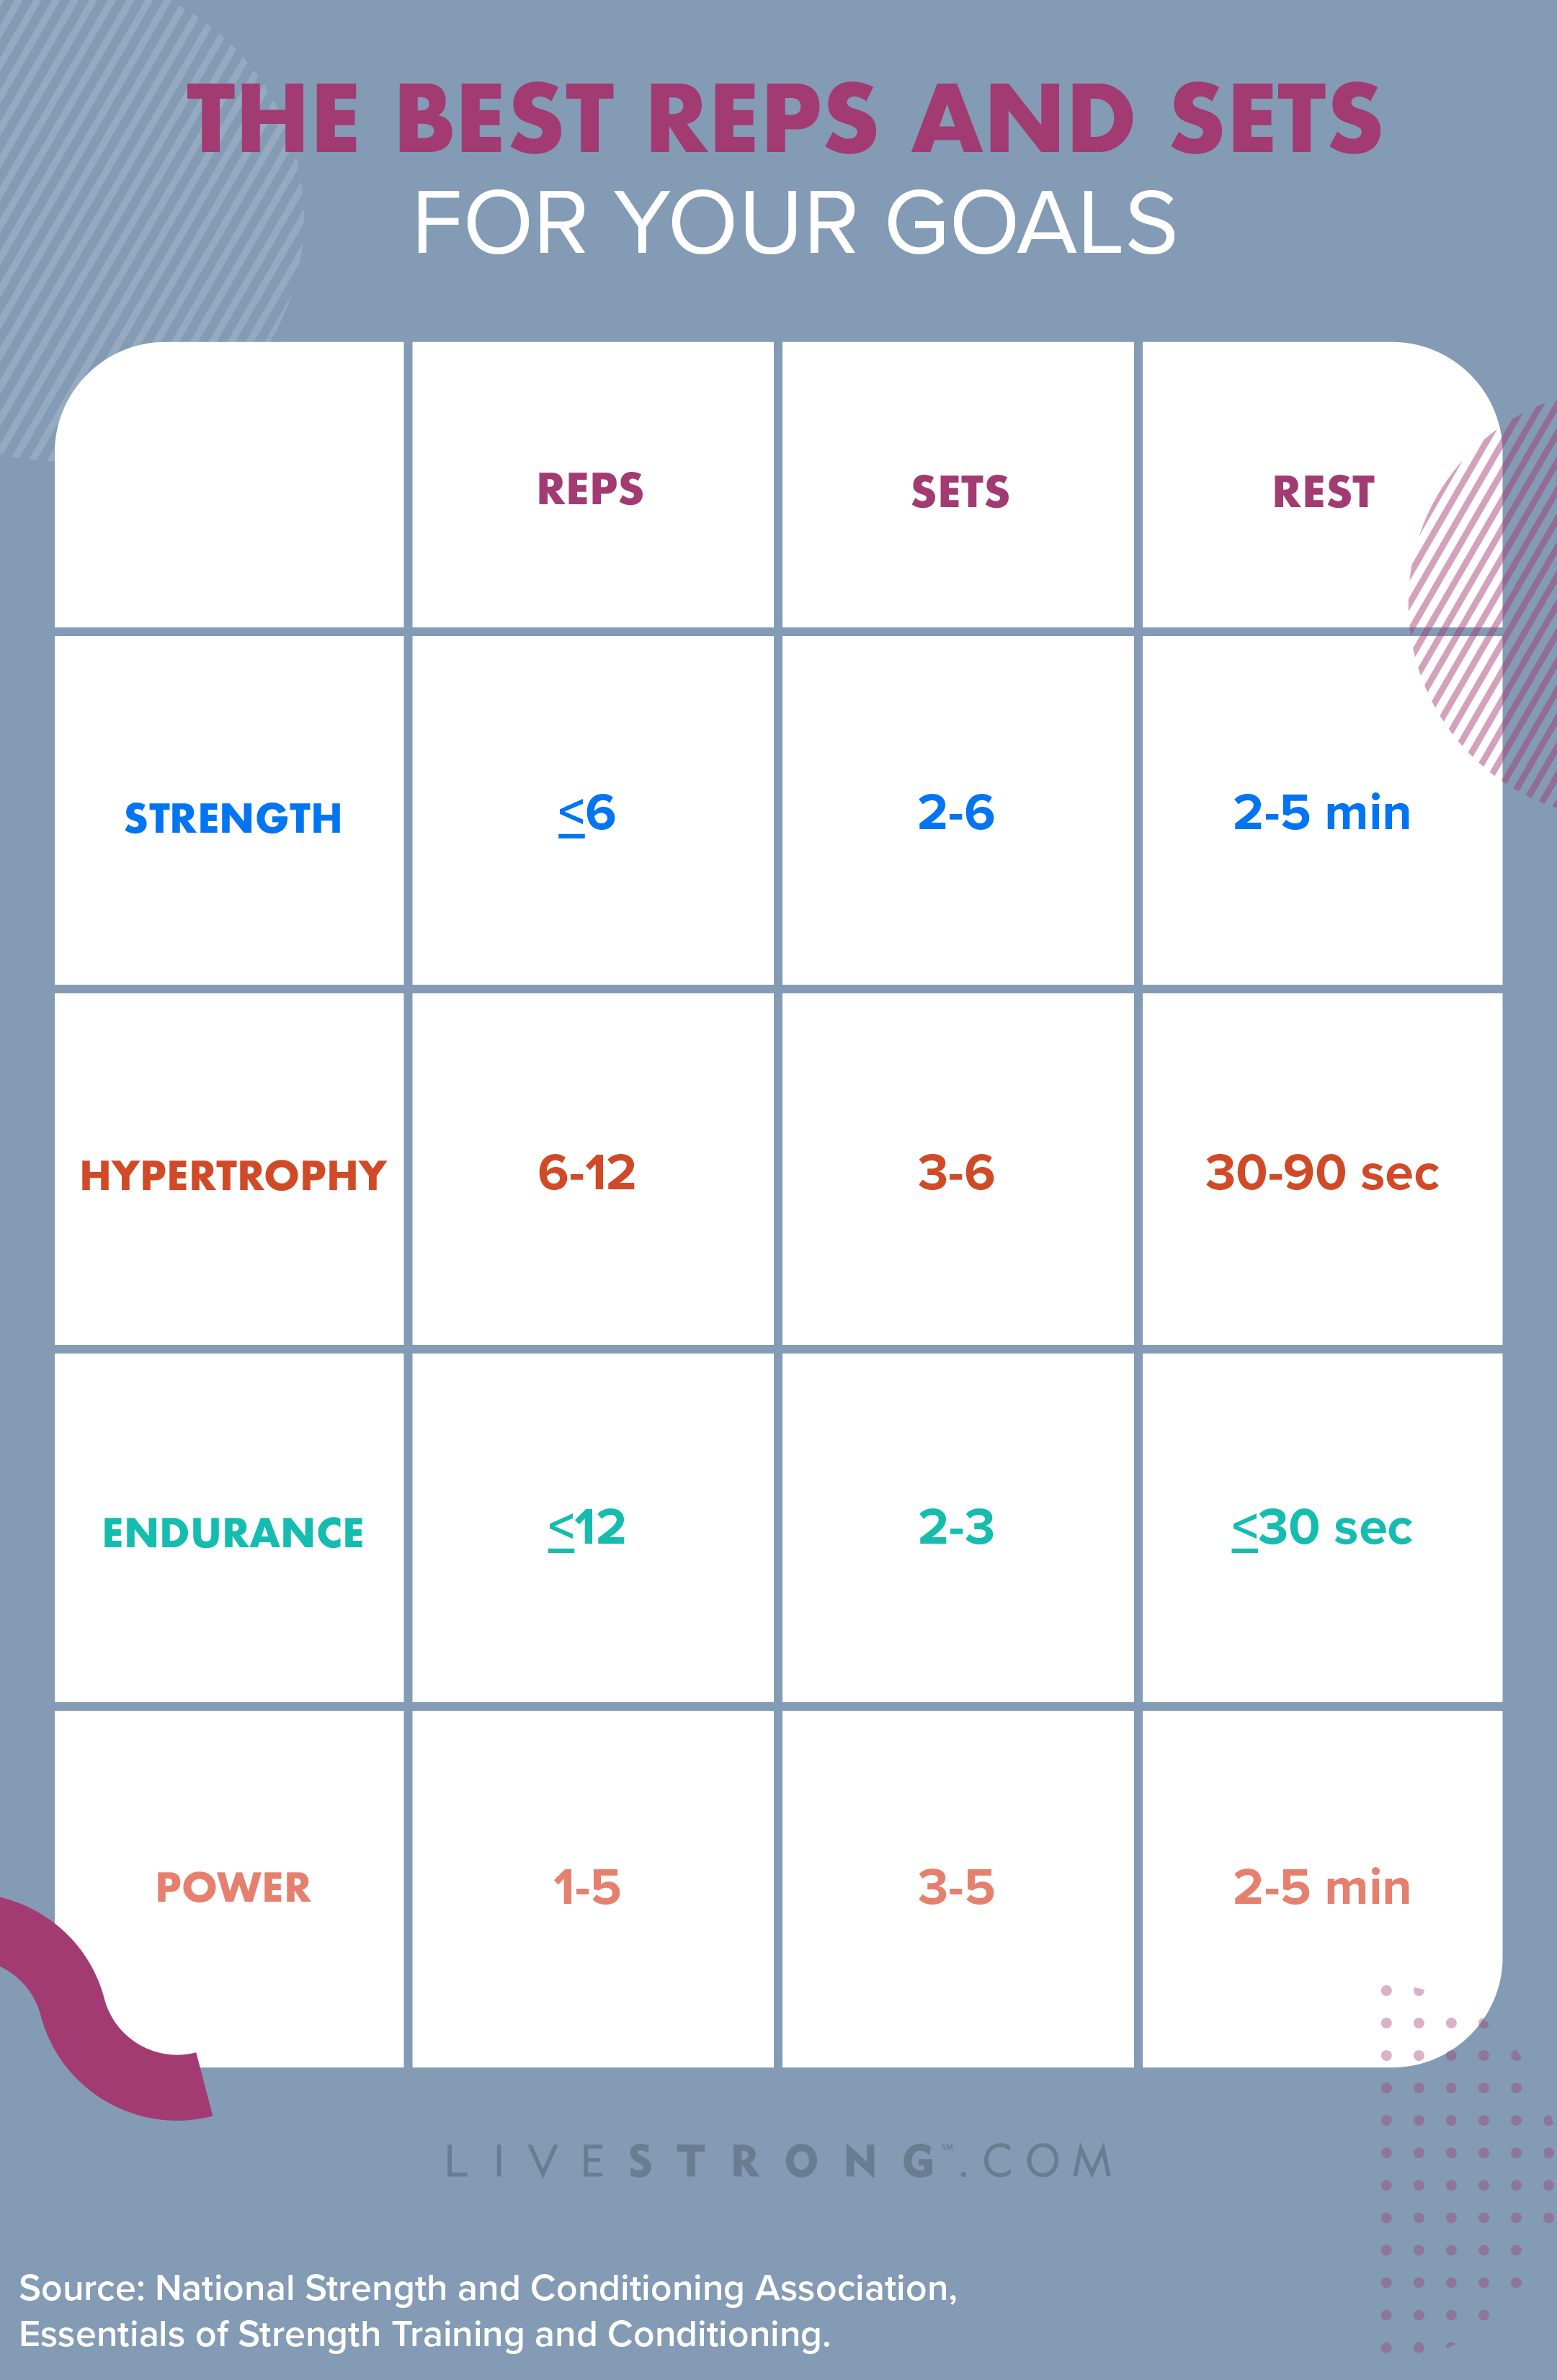 Reps and Sets: How Many Reps Should You Do?